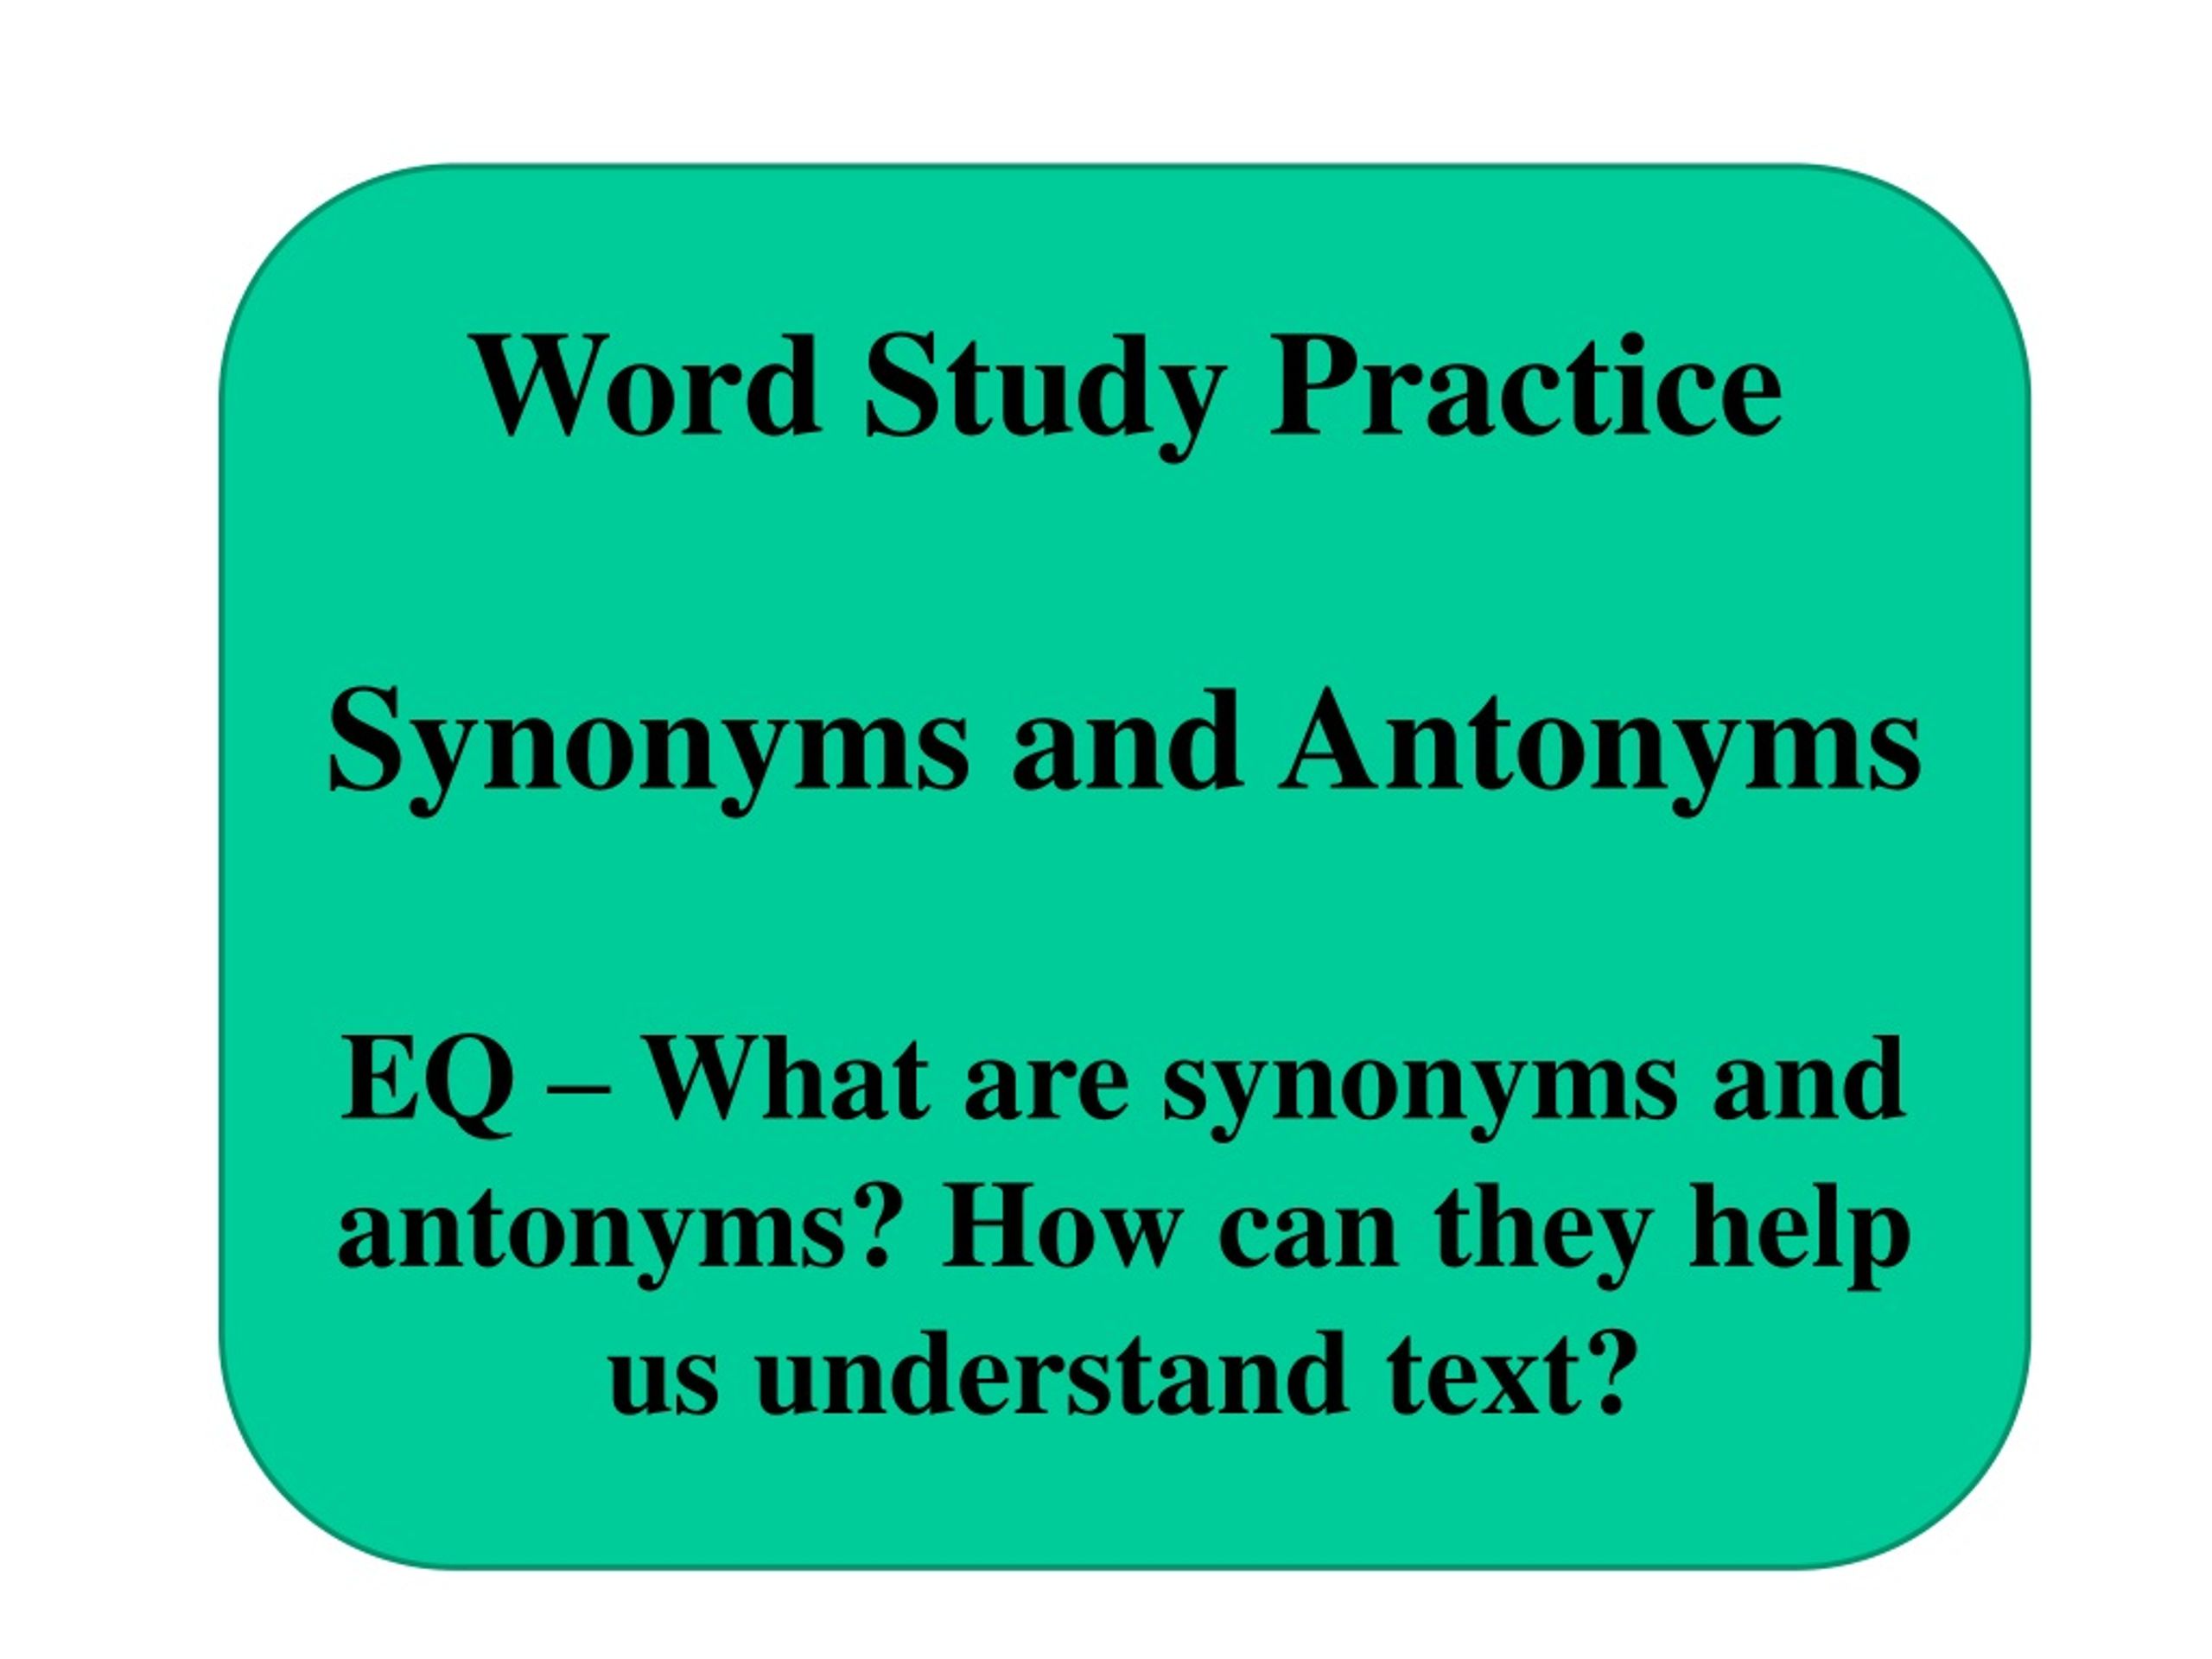 What Are Synonyms?